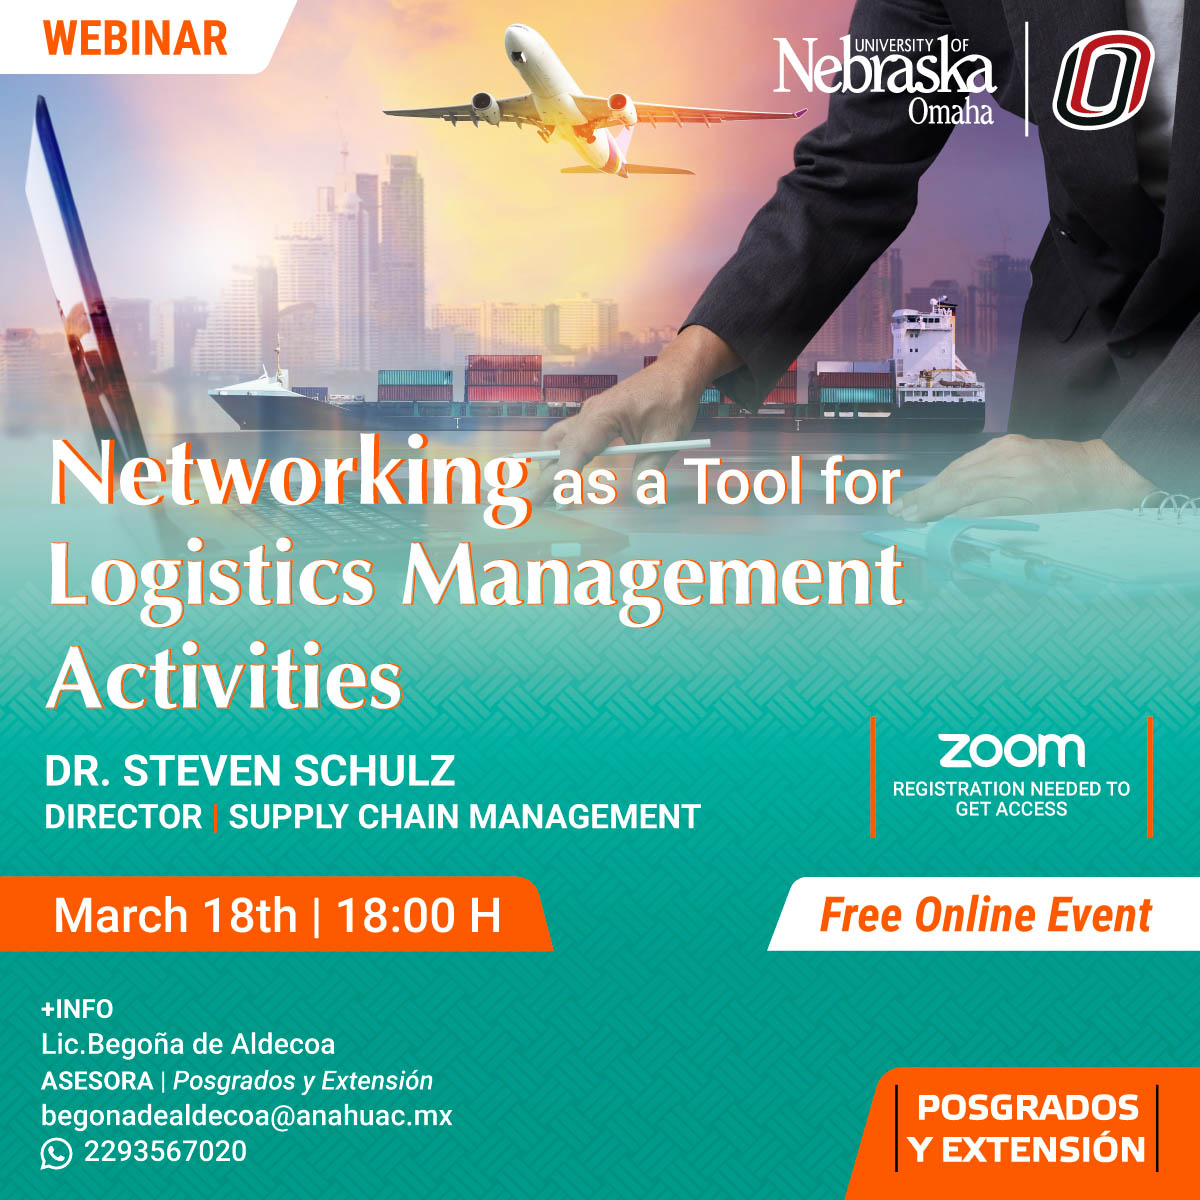 Networking as a Tool for Logistics Management Activities